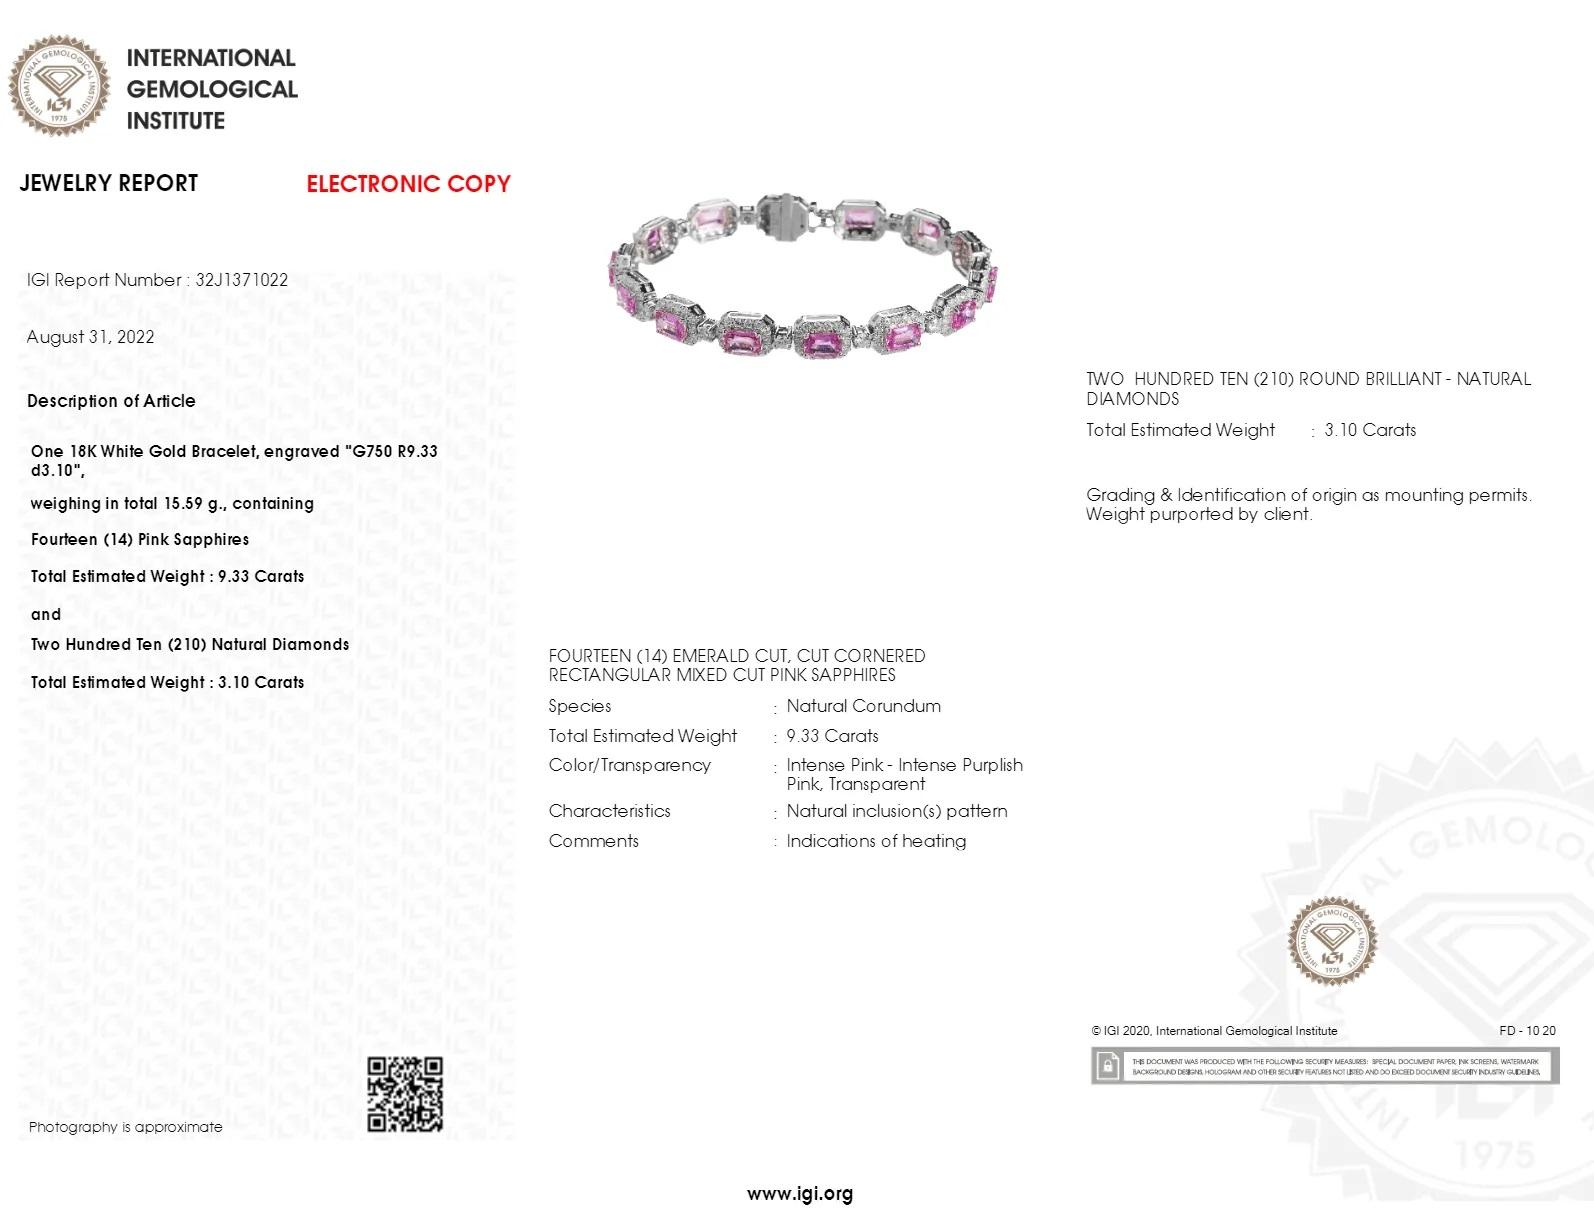 This unique, brilliant and exceptional bracelet features a spectacular pink sapphires is designed by CADMUS in 18K white gold.
Accompanied by a IGI Report, this pink sapphire is certified, which is an extremely rare find for matched pink sapphires